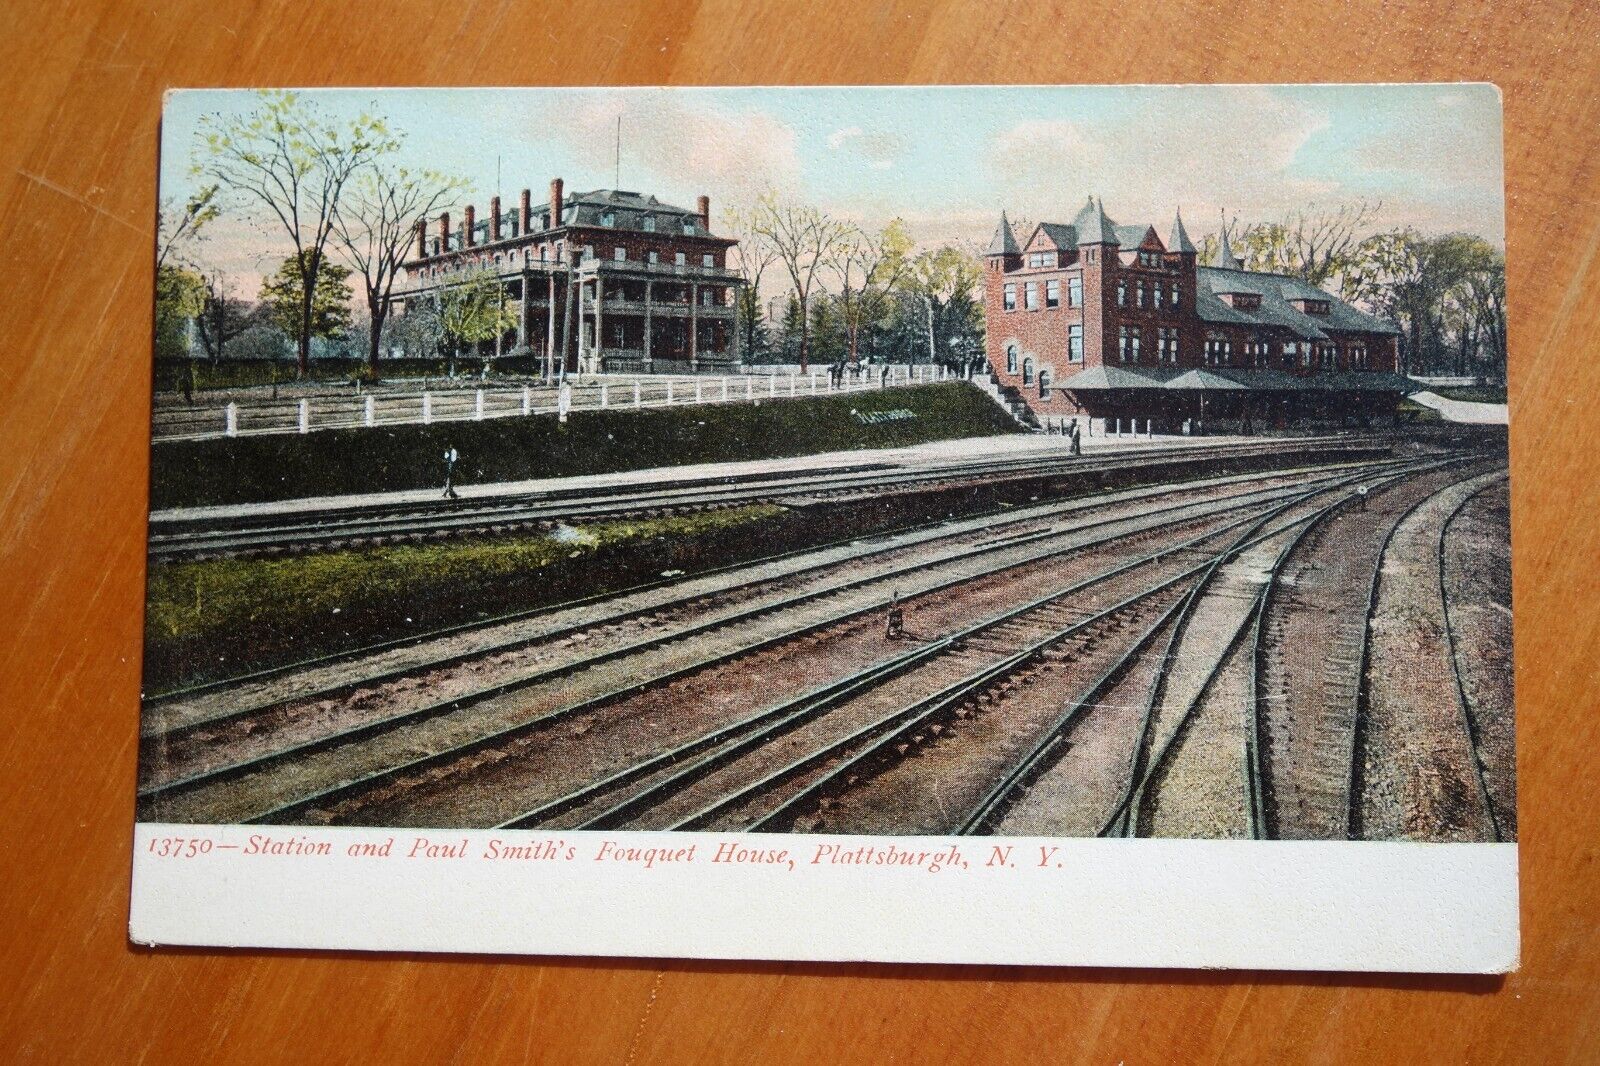 Railroad Station and Paul Smith\'s Fouquet House, Plattsburg NY undividedpostcard